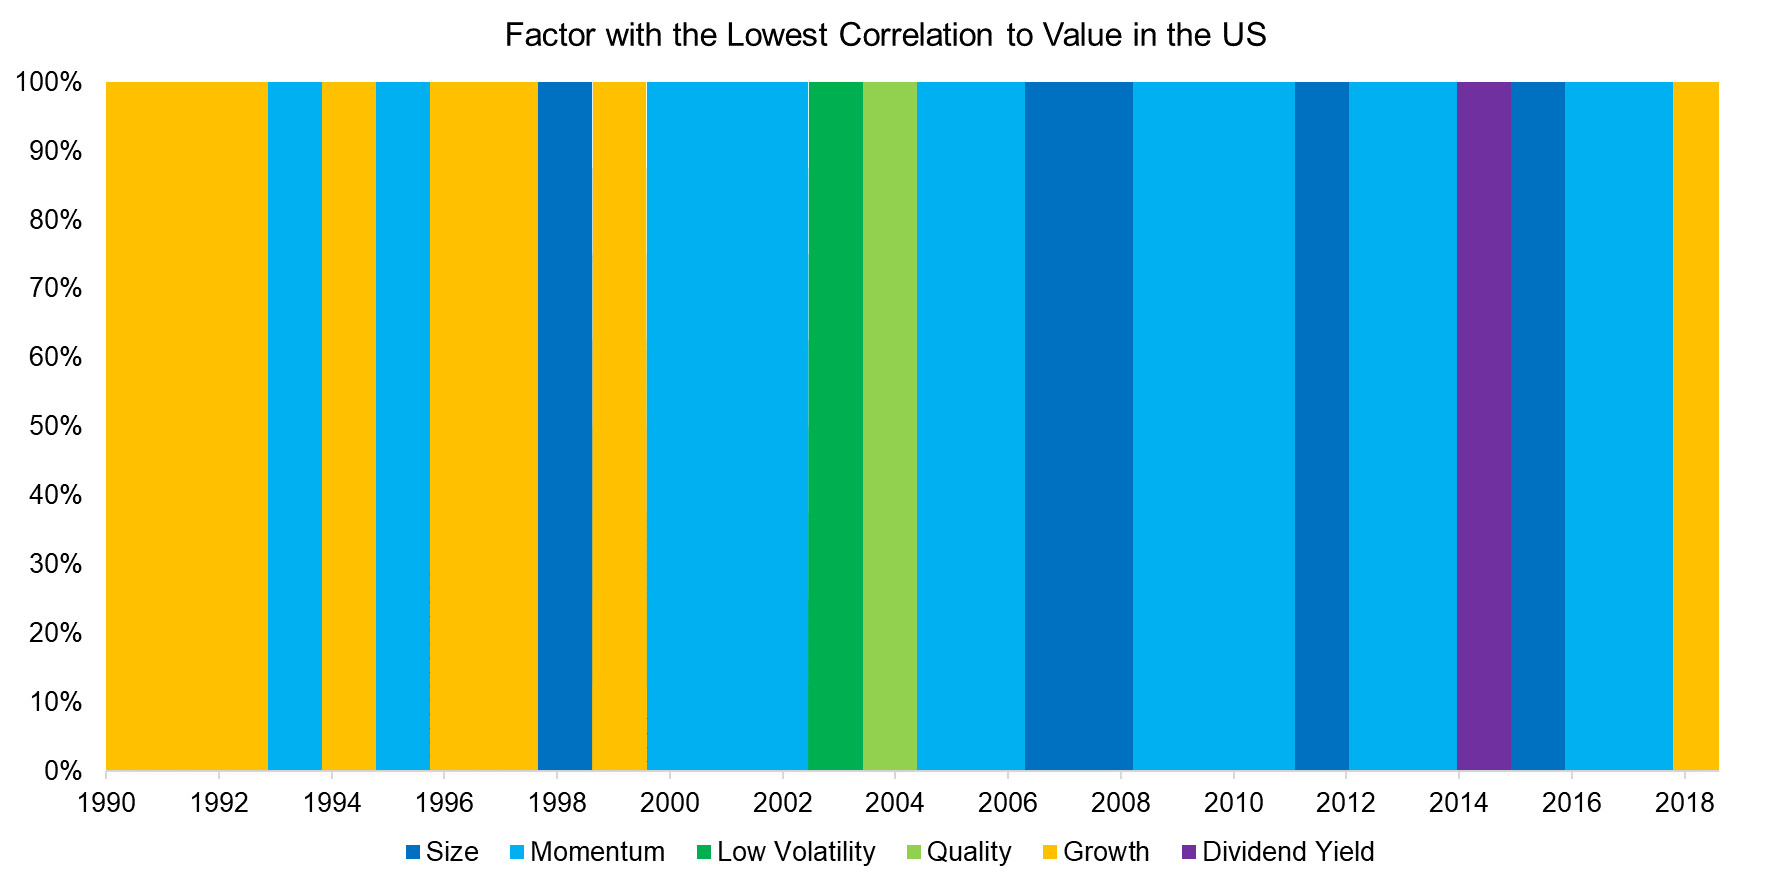 Factor with the Lowest Correlation to Value in the US